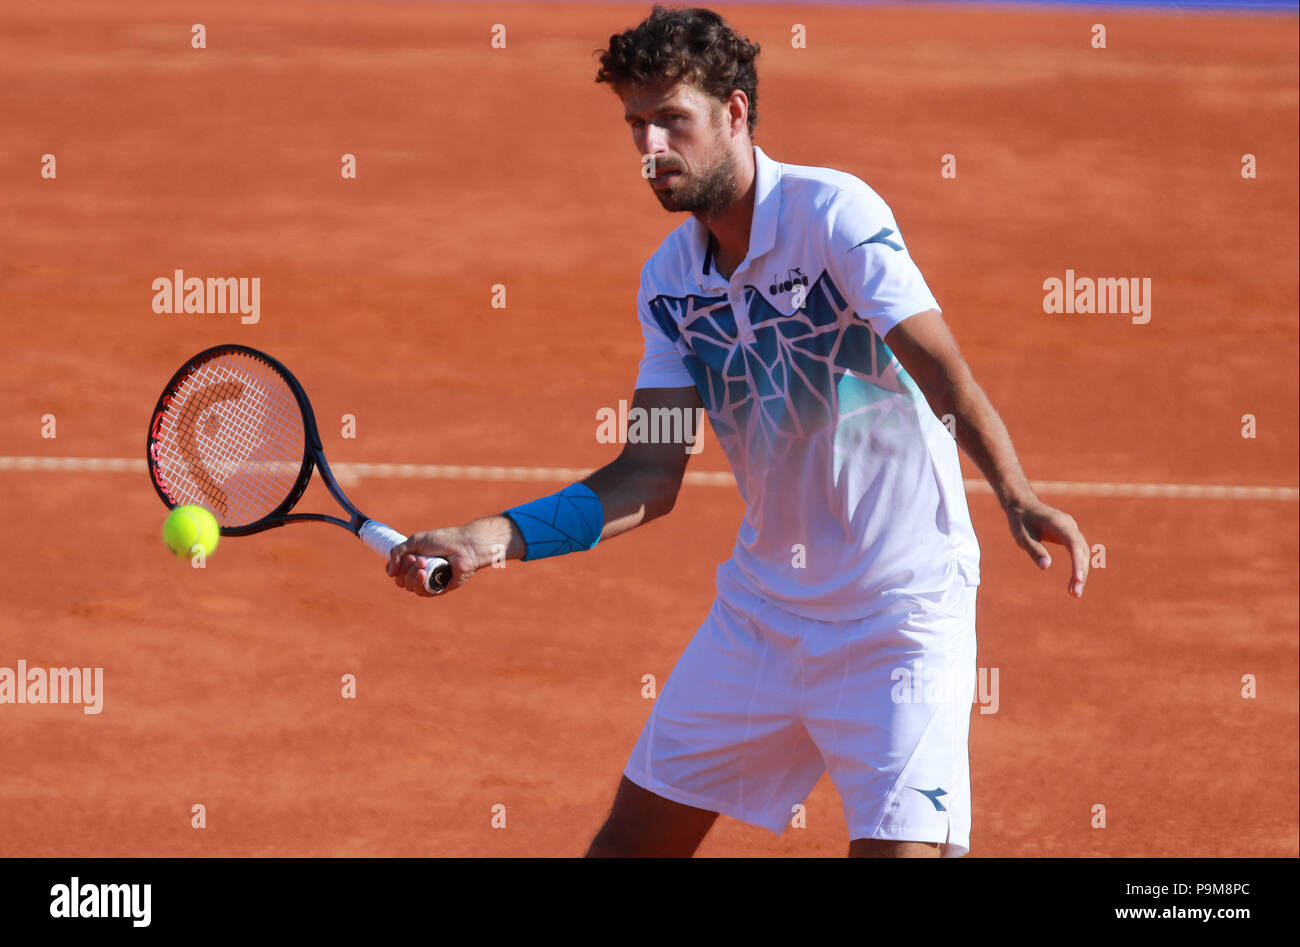 Umag, CROATIA, Umag: Robin Haase of Holland controls the ball during the singles match Klizan v Haase at the ATP 29th Plava laguna Croatia Open Umag tournament at the at the Goran Ivanisevic ATP Stadium, on July 19, 2018 in Umag. Credit: Andrea Spinelli/Alamy Live News Stock Photo